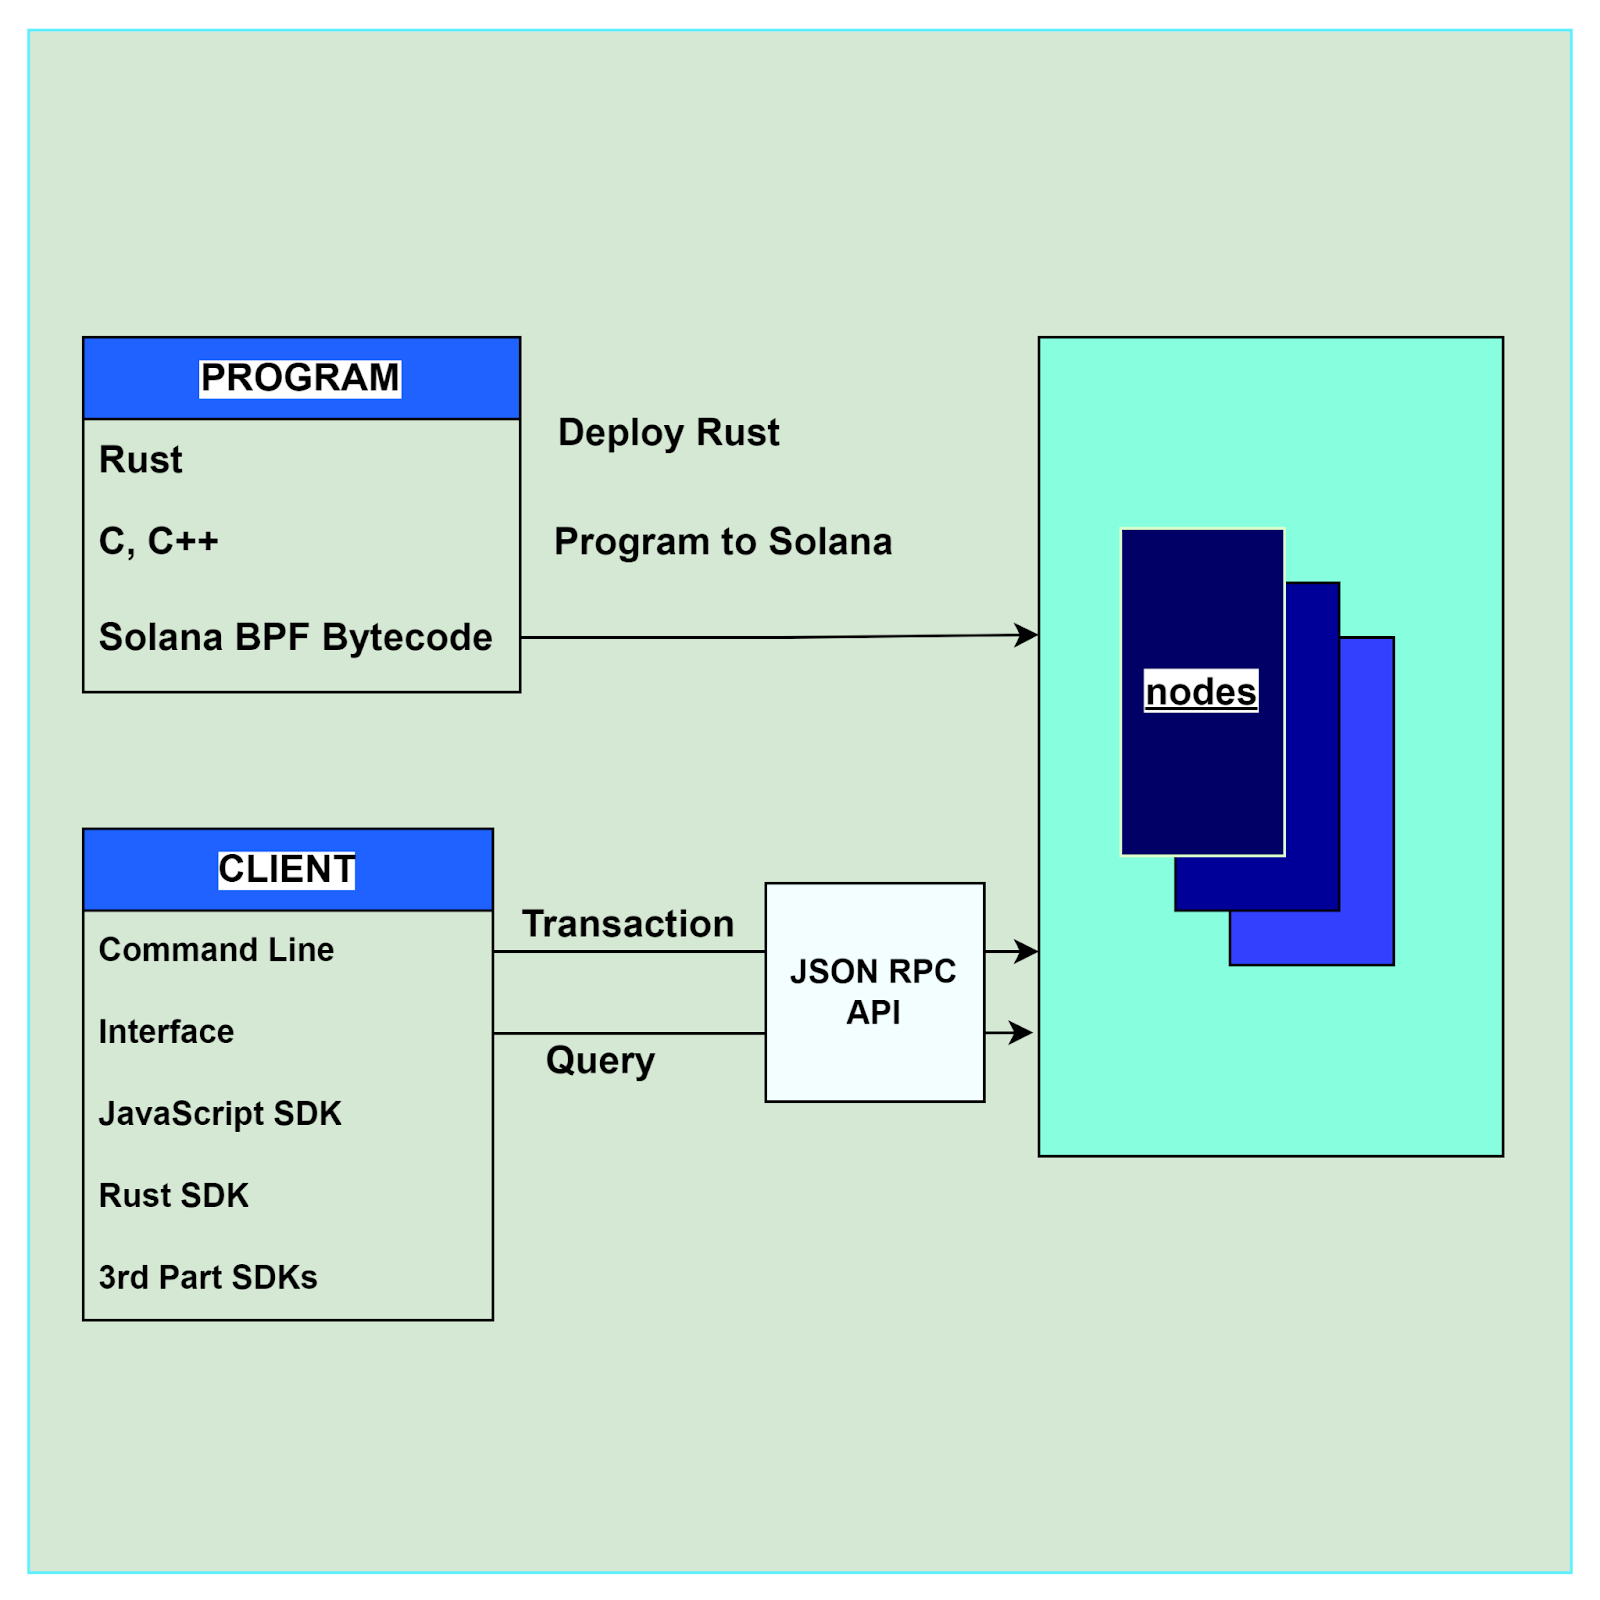 Architecture Overview of Solana Programs and Client Interaction